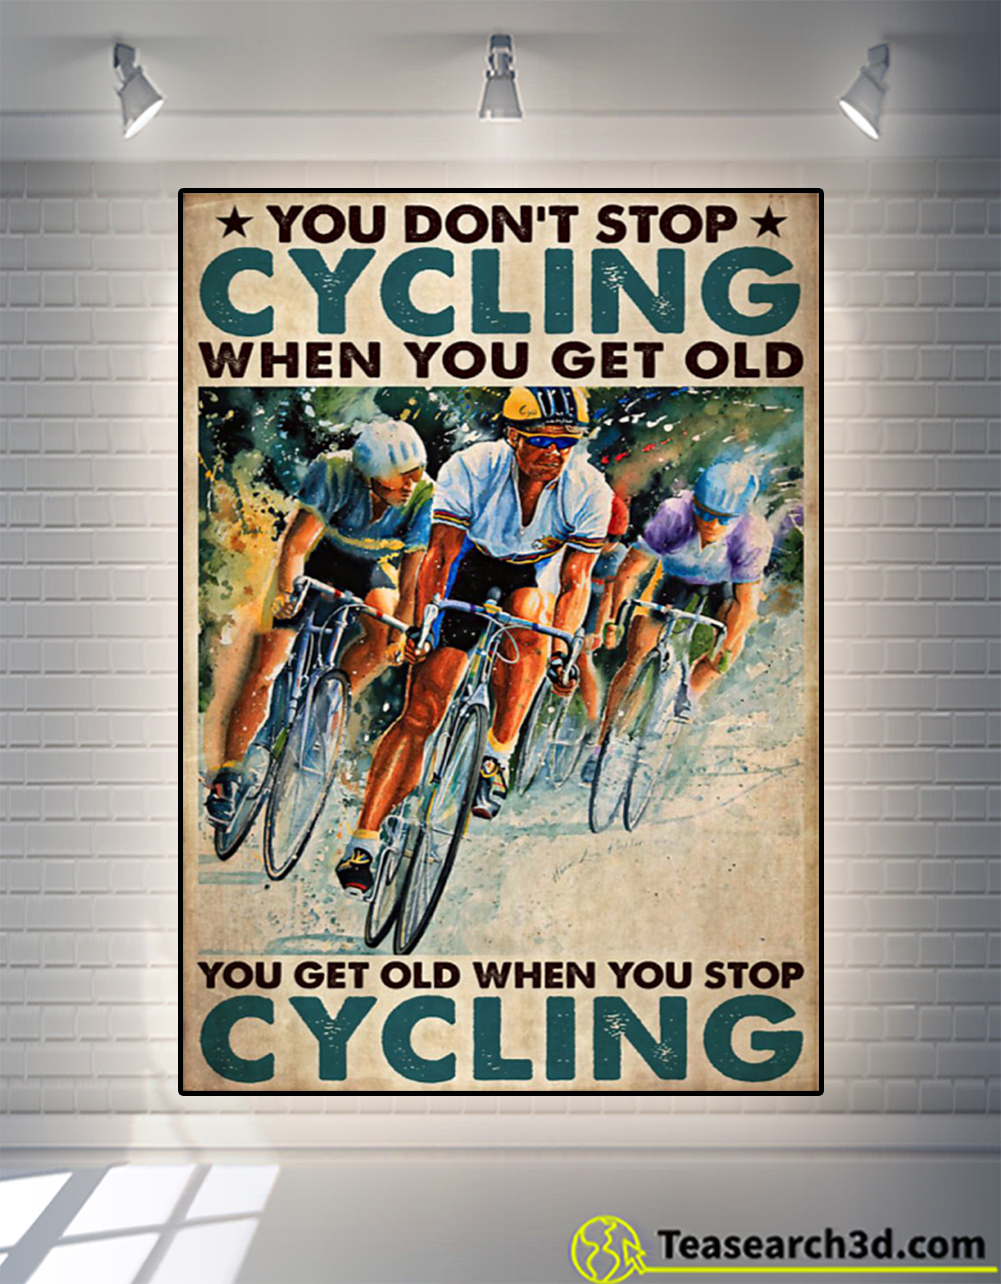 You get old when you stop cycling poster